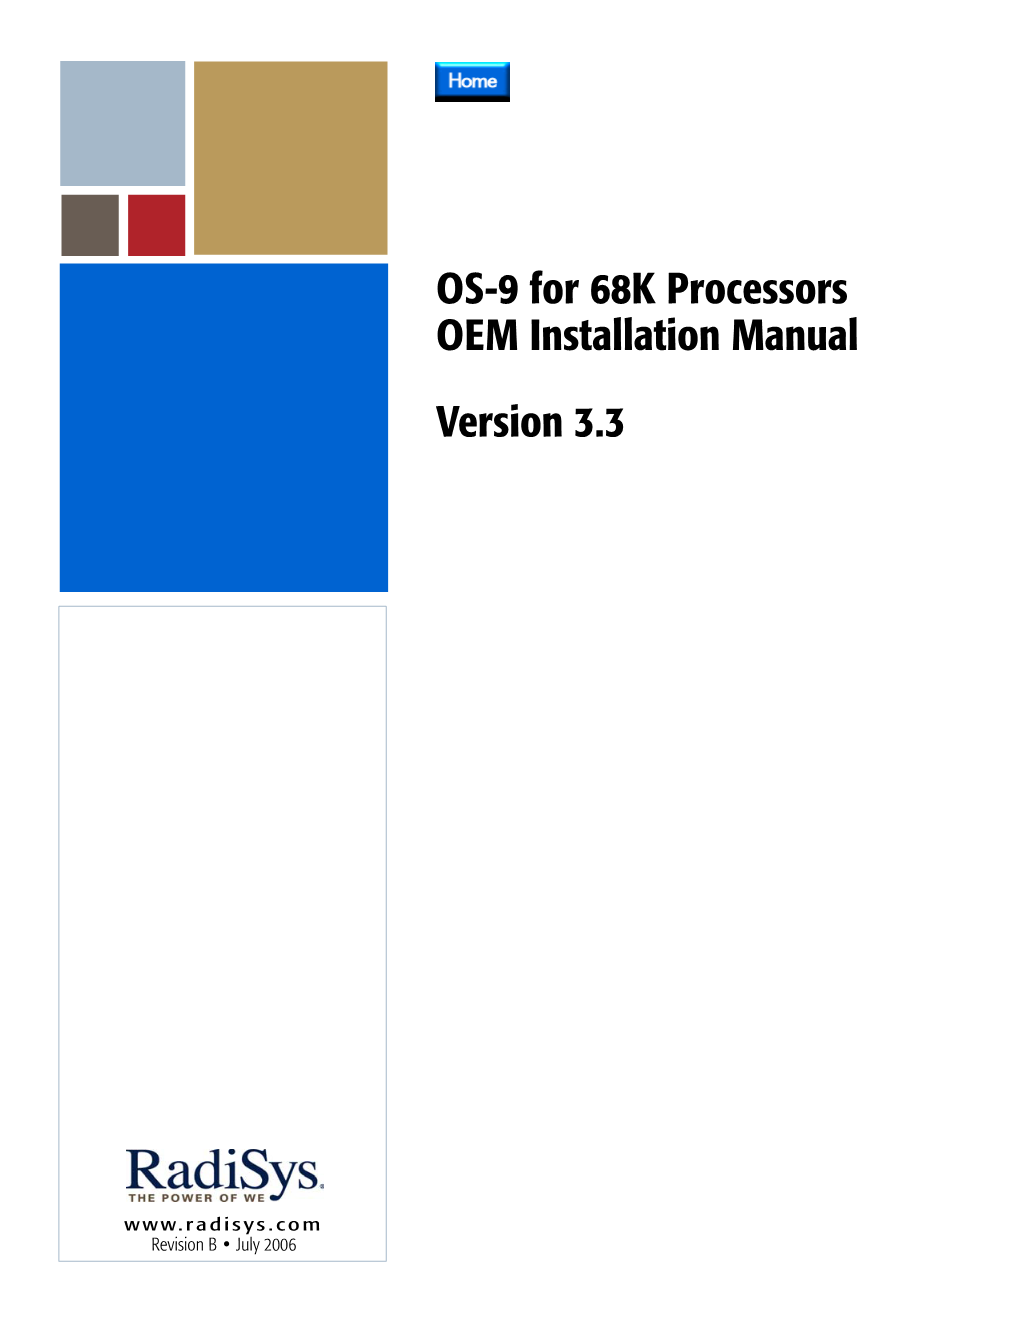 OS-9 for 68K Processors OEM Installation Manual